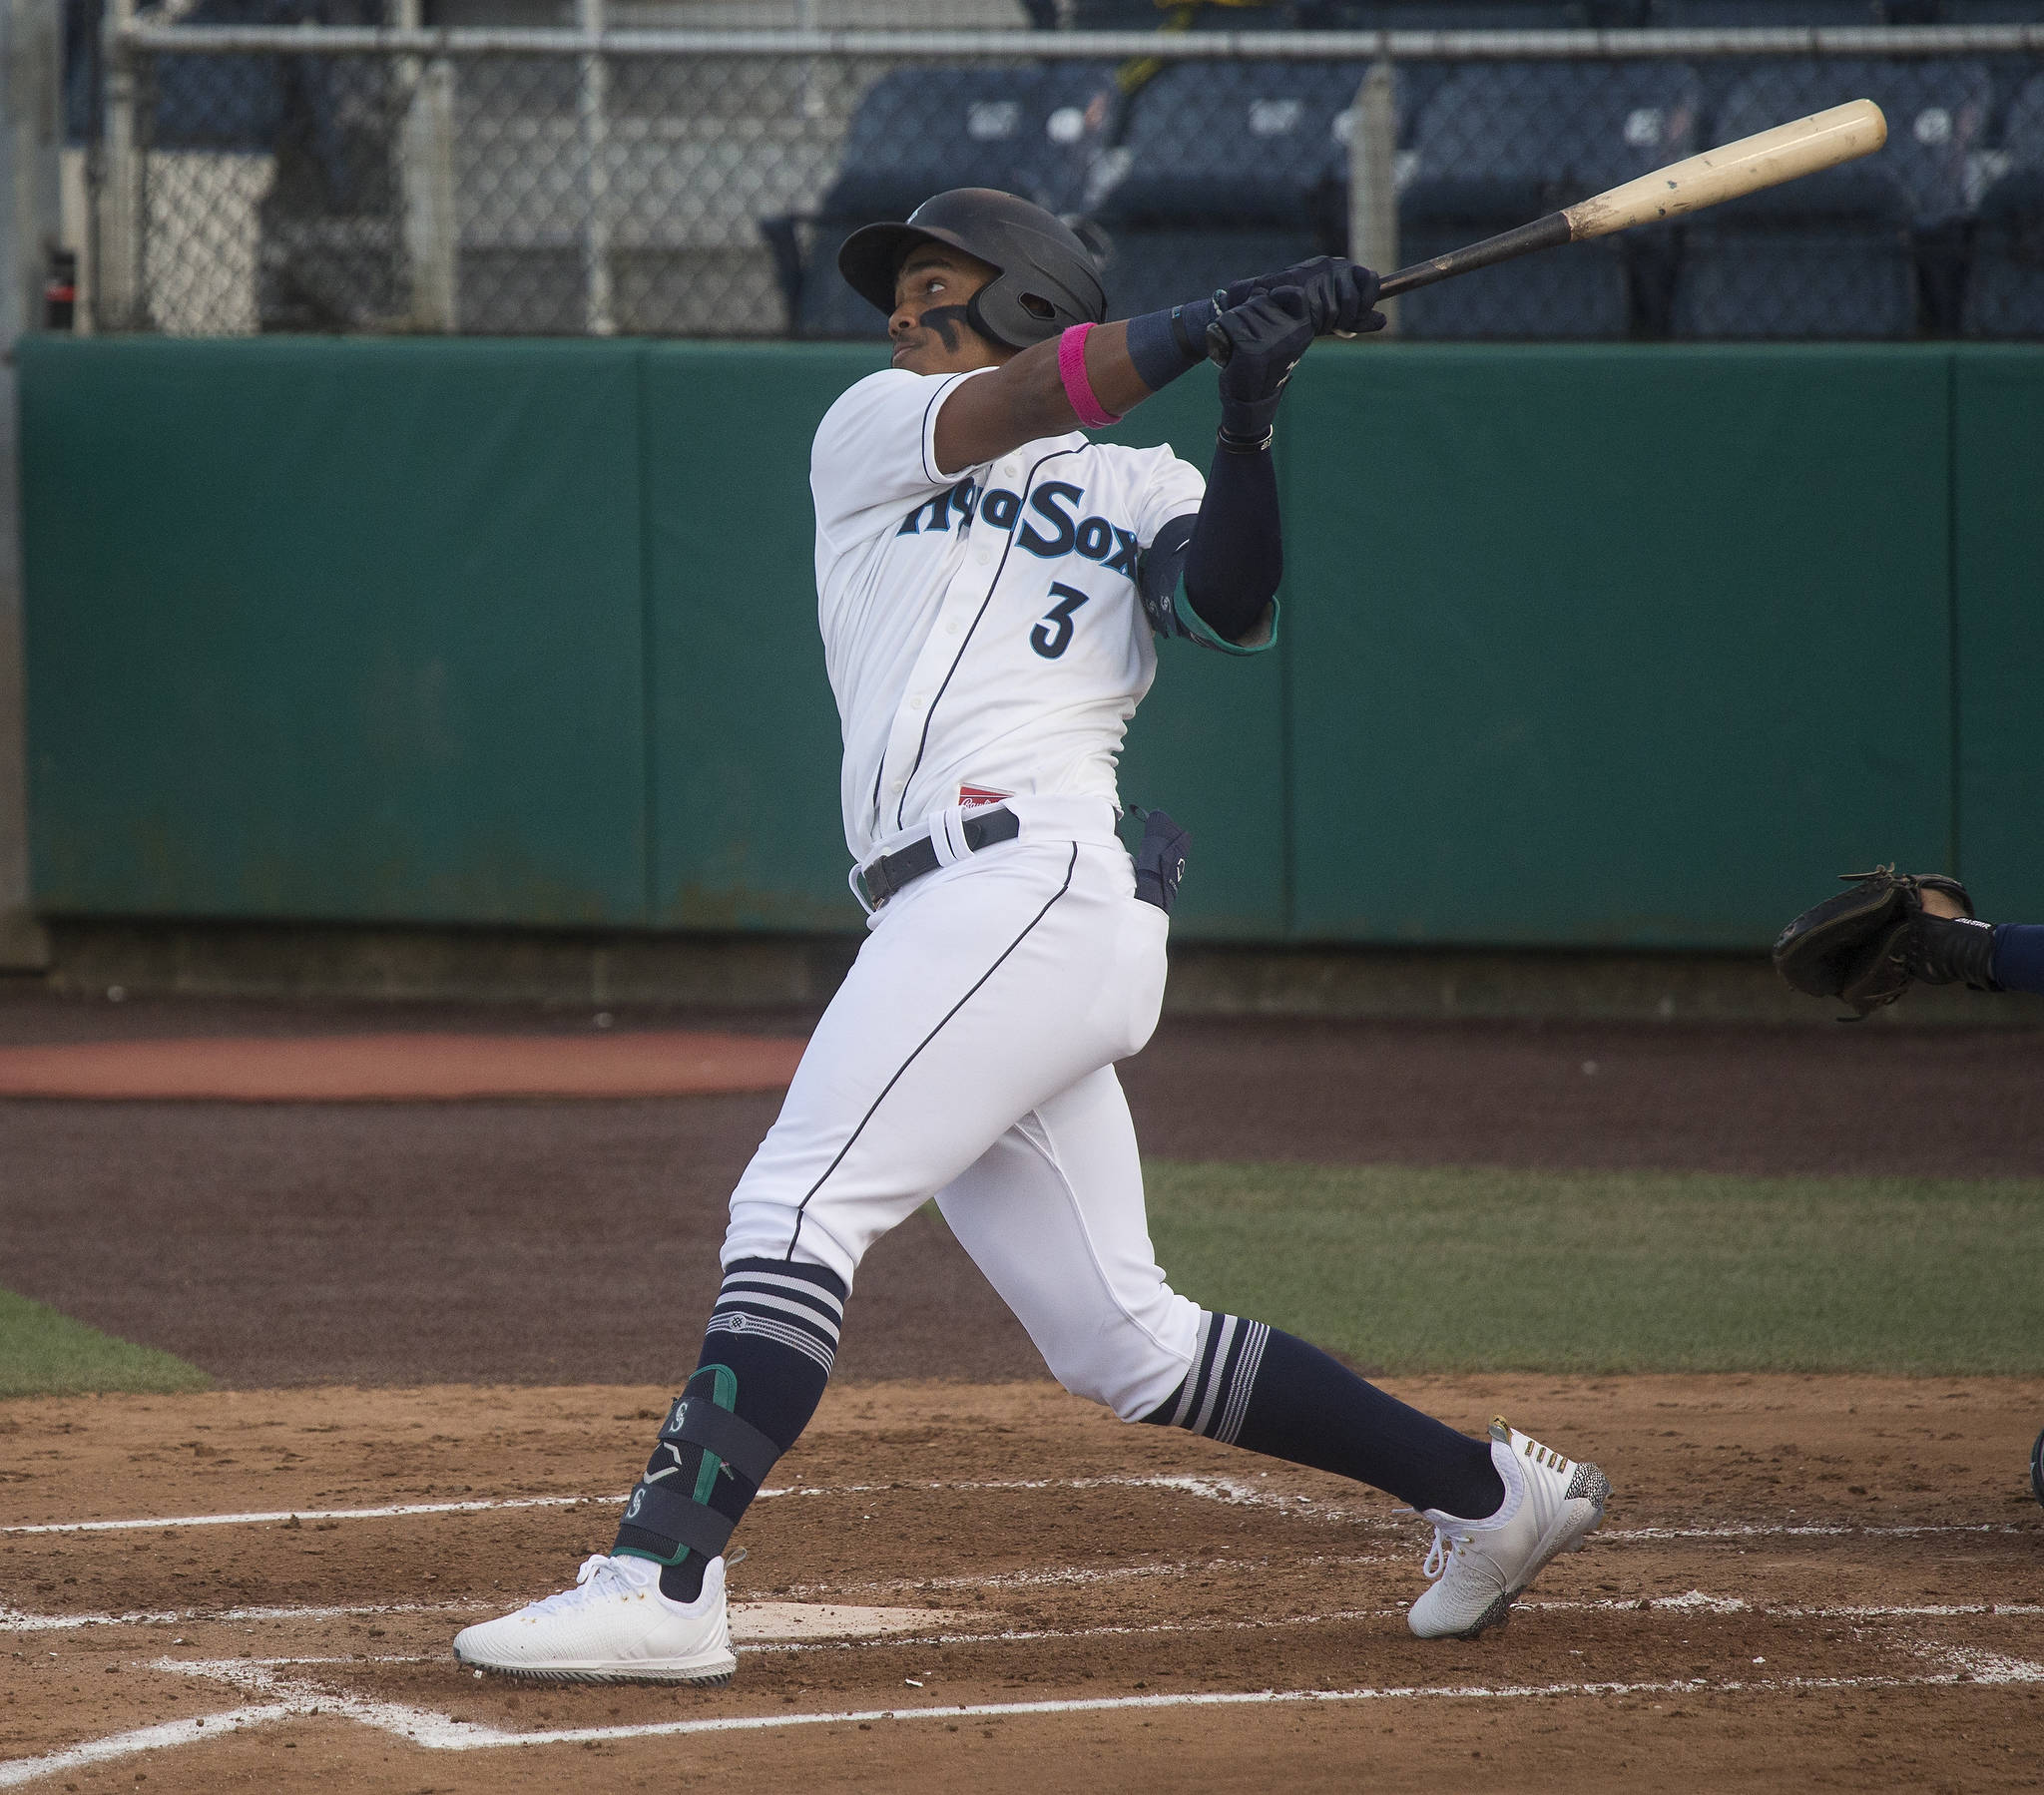 Aquasox’s Julio Rodriguez hits a two run homer as the Everett Aquasox beat the Tri-City Dust Devils in a home opening game at Funko Field on Tuesday, May 11, 2021 in Everett, Washington. (Andy Bronson / The Herald)